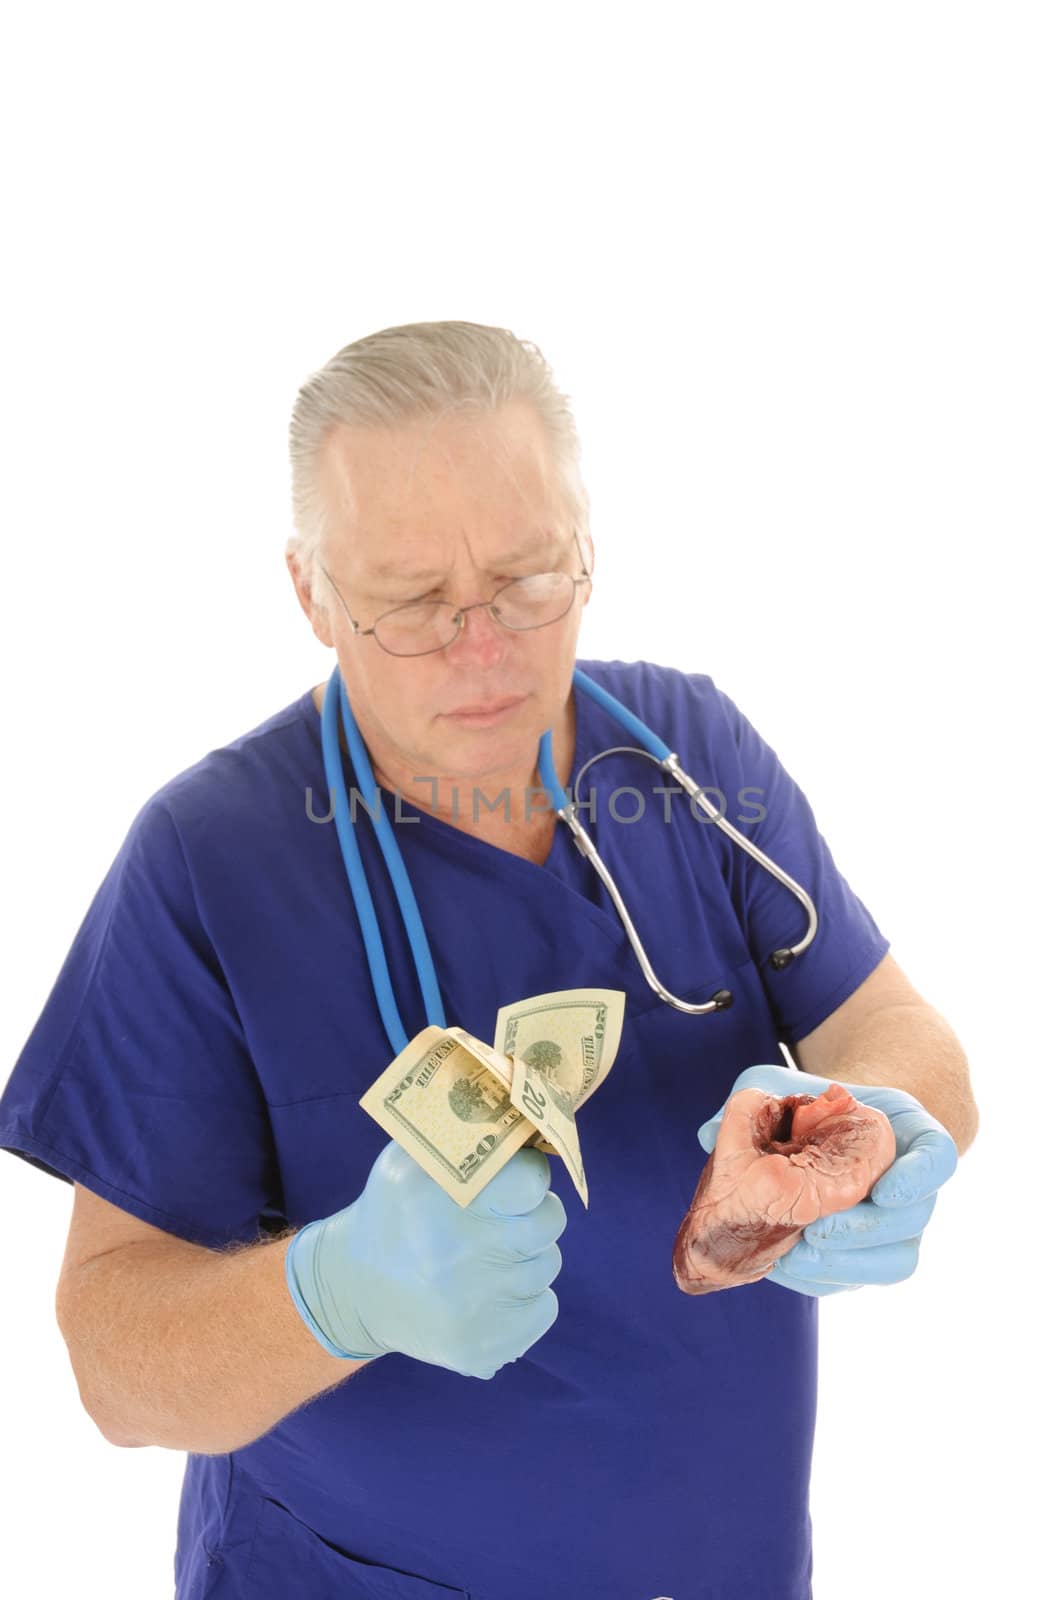 Doctor holding fist full of money repesentign the escalating costs of medical atention, and or body parts for sale